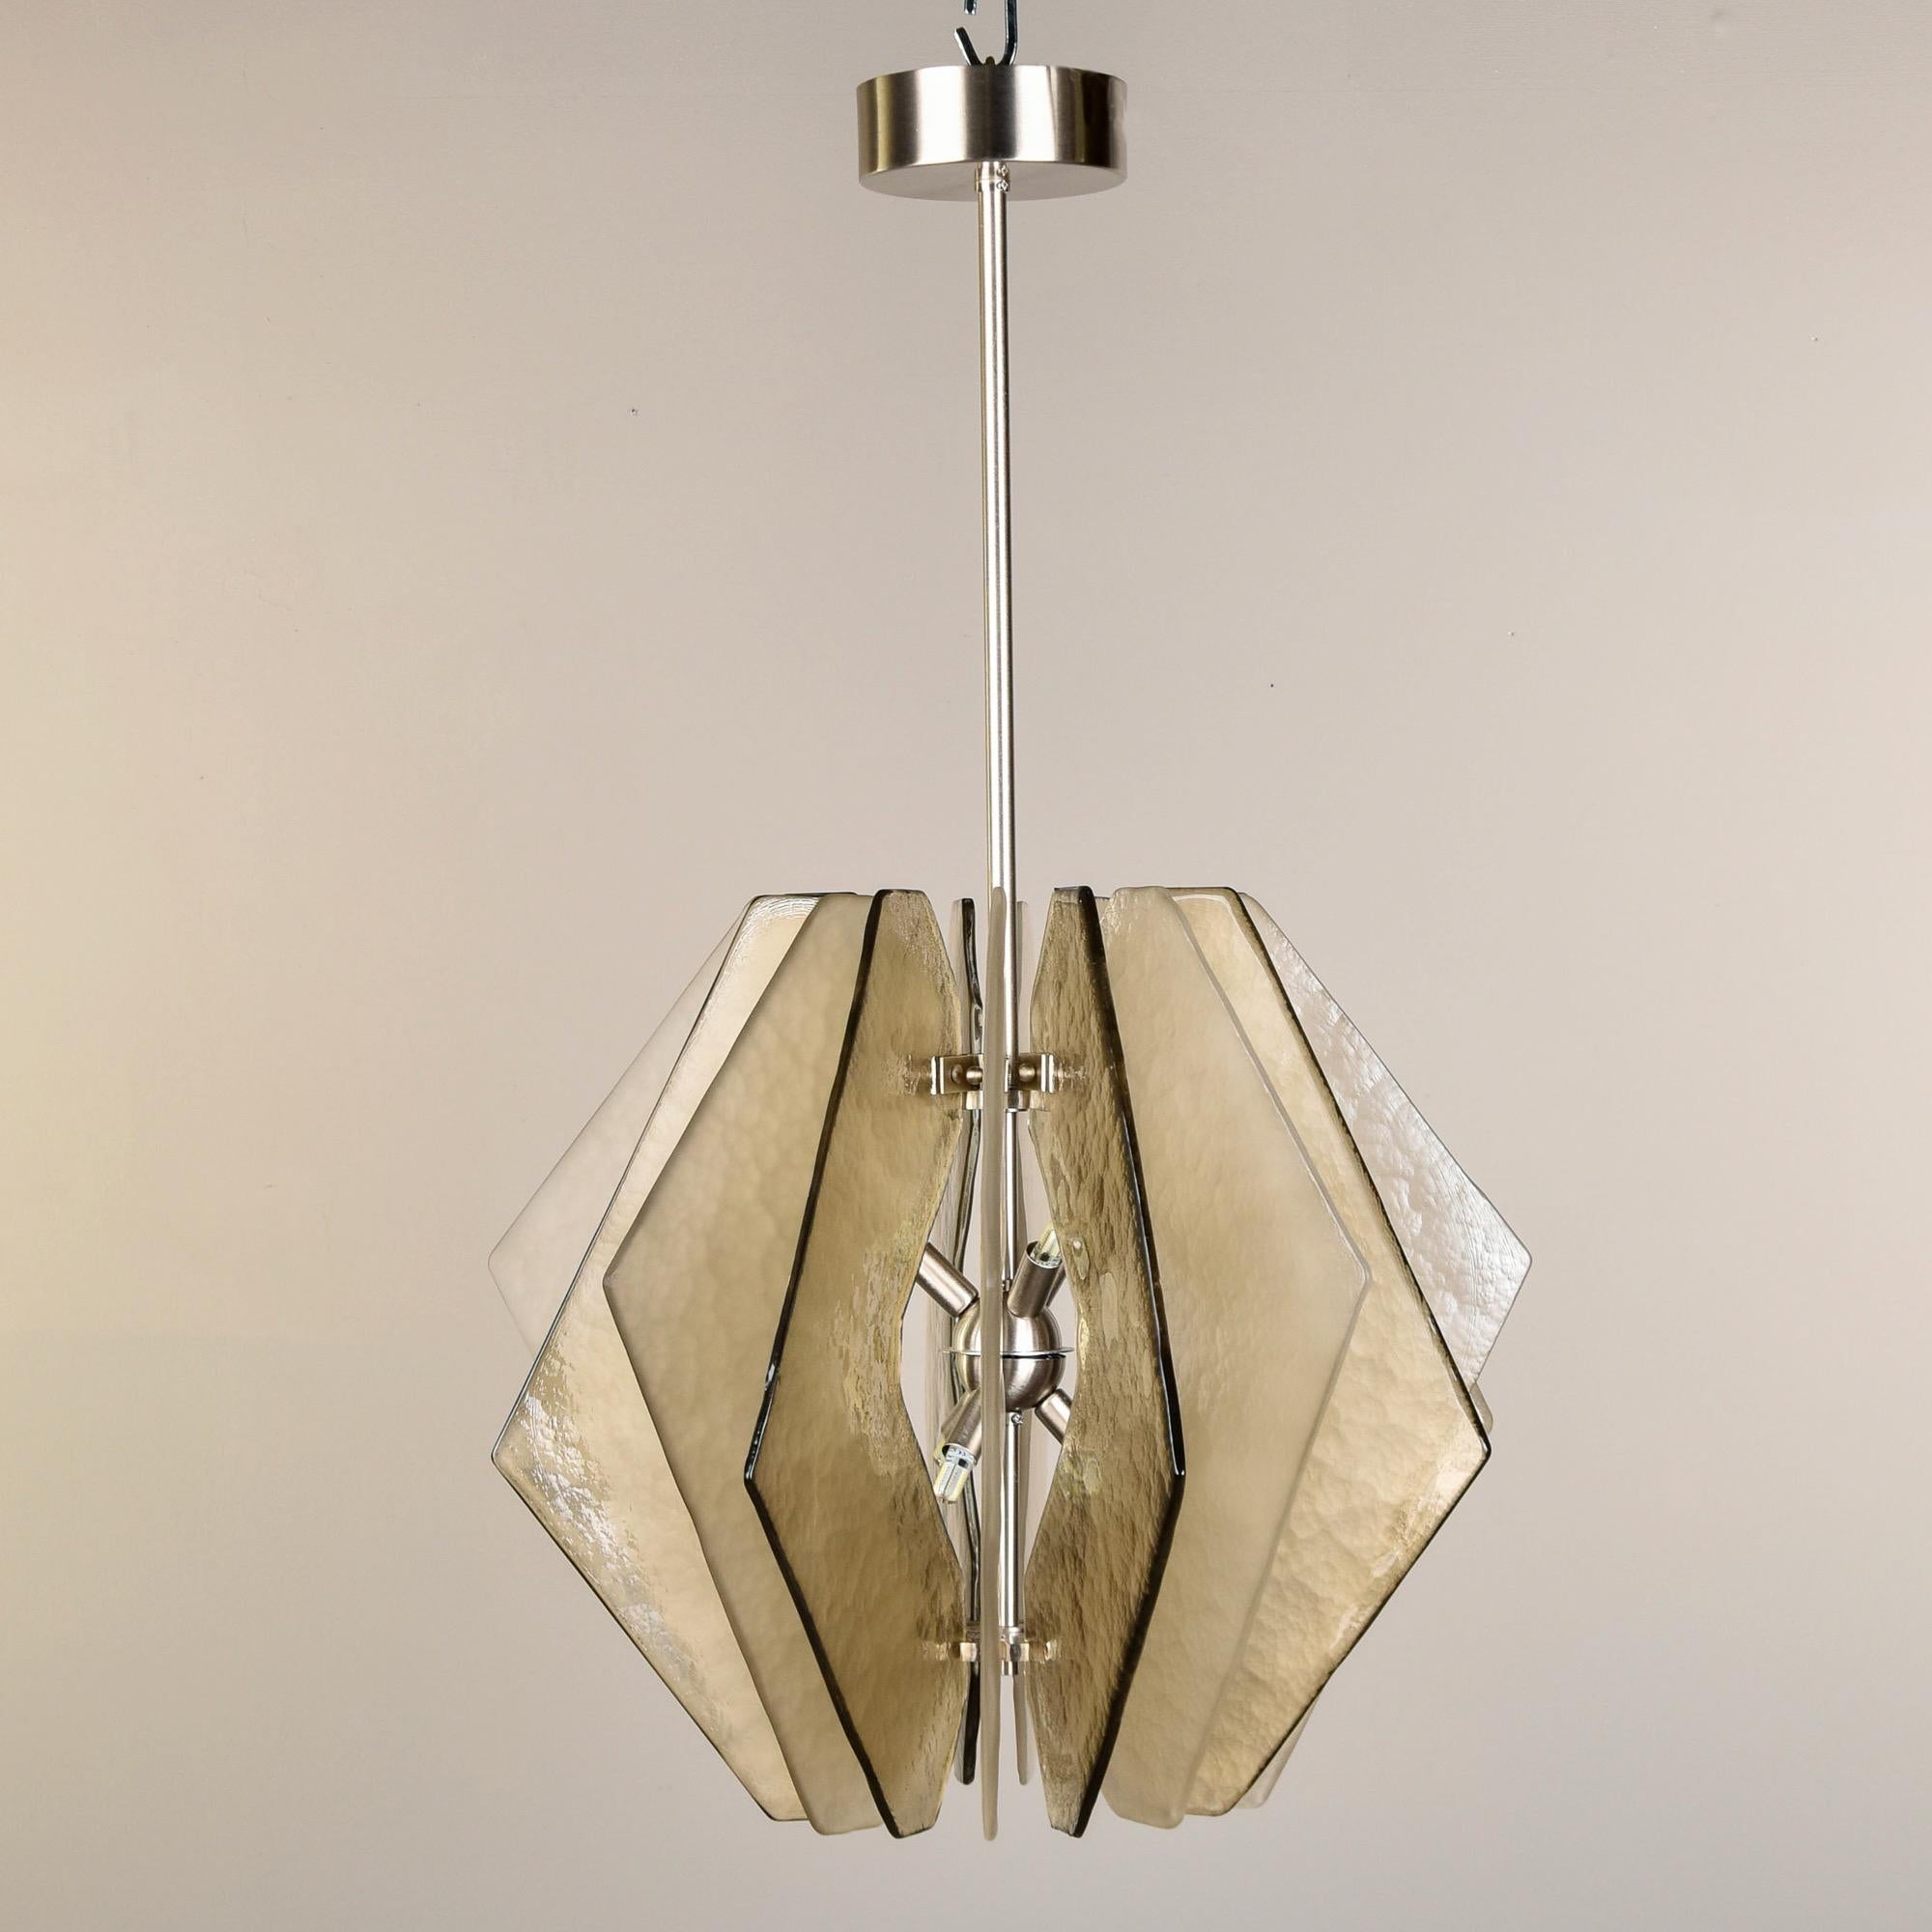 New chandelier made in Italy with Murano glass panels. Polished chrome hardware and canopy, six light fixture with heavy textured taupe colored glass panels arranged so that the glossy and satin finishes alternate.  Unknown maker. New wiring for US